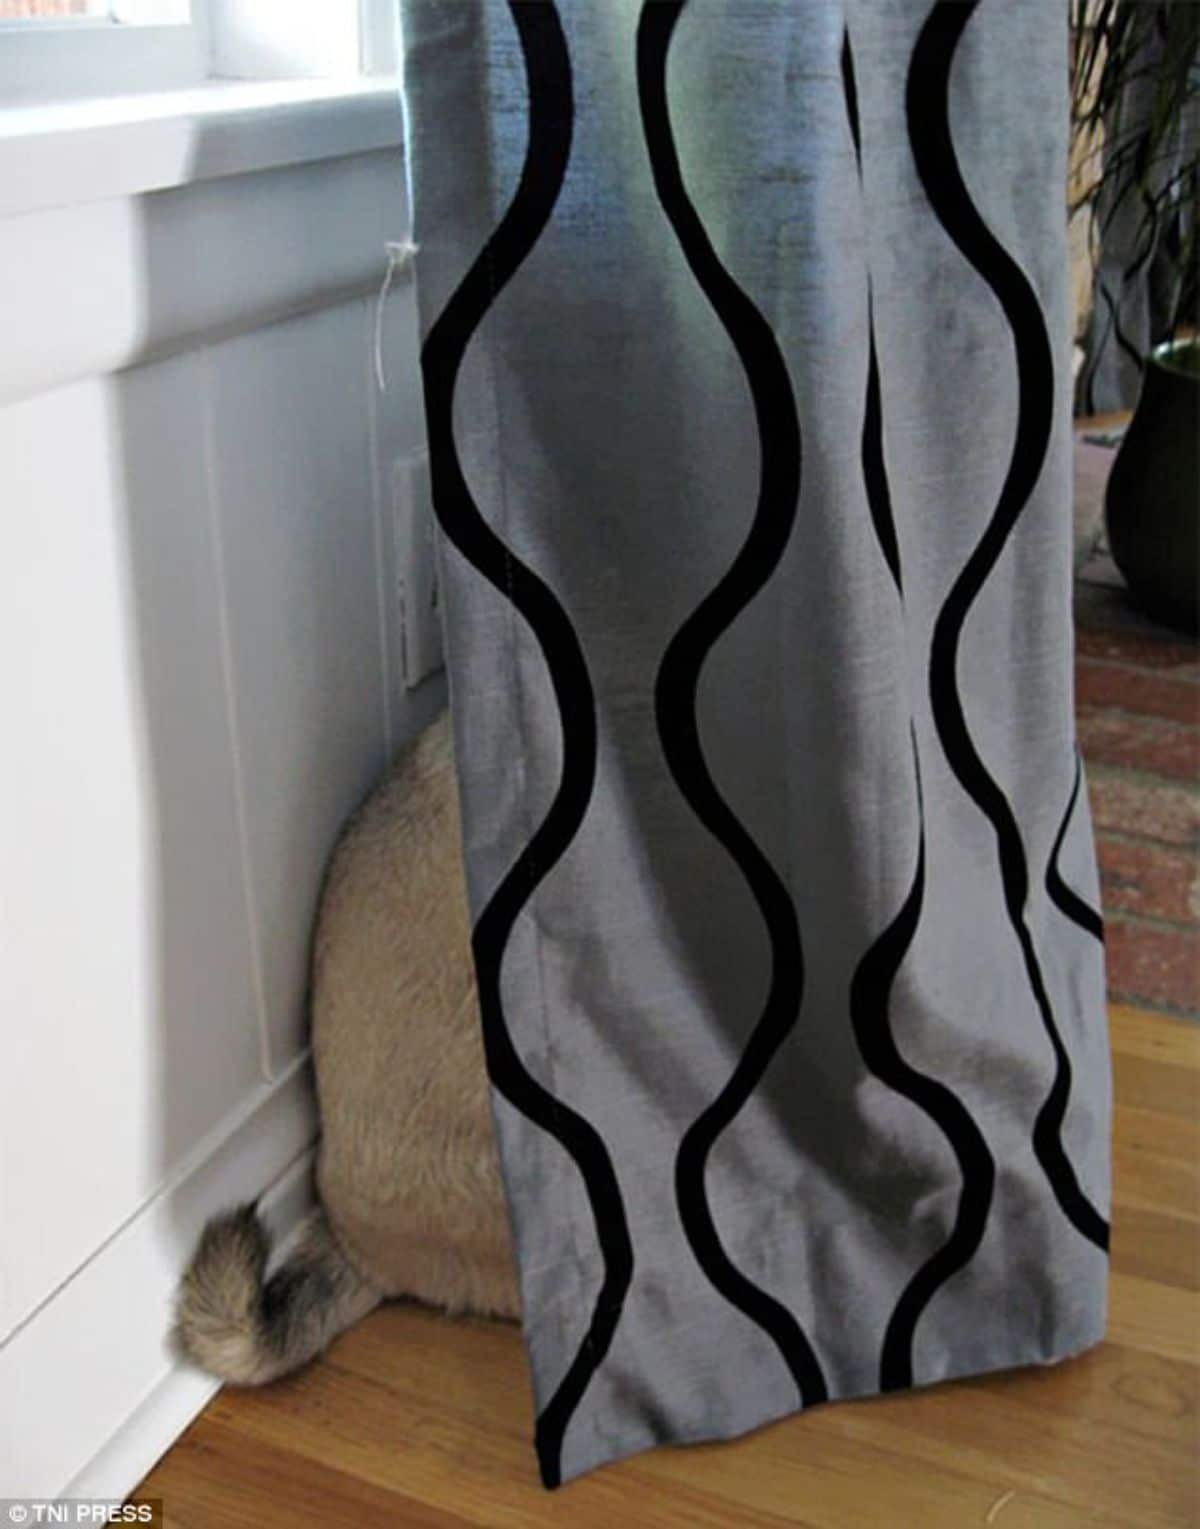 brown dog sitting behind a silver and black curtain